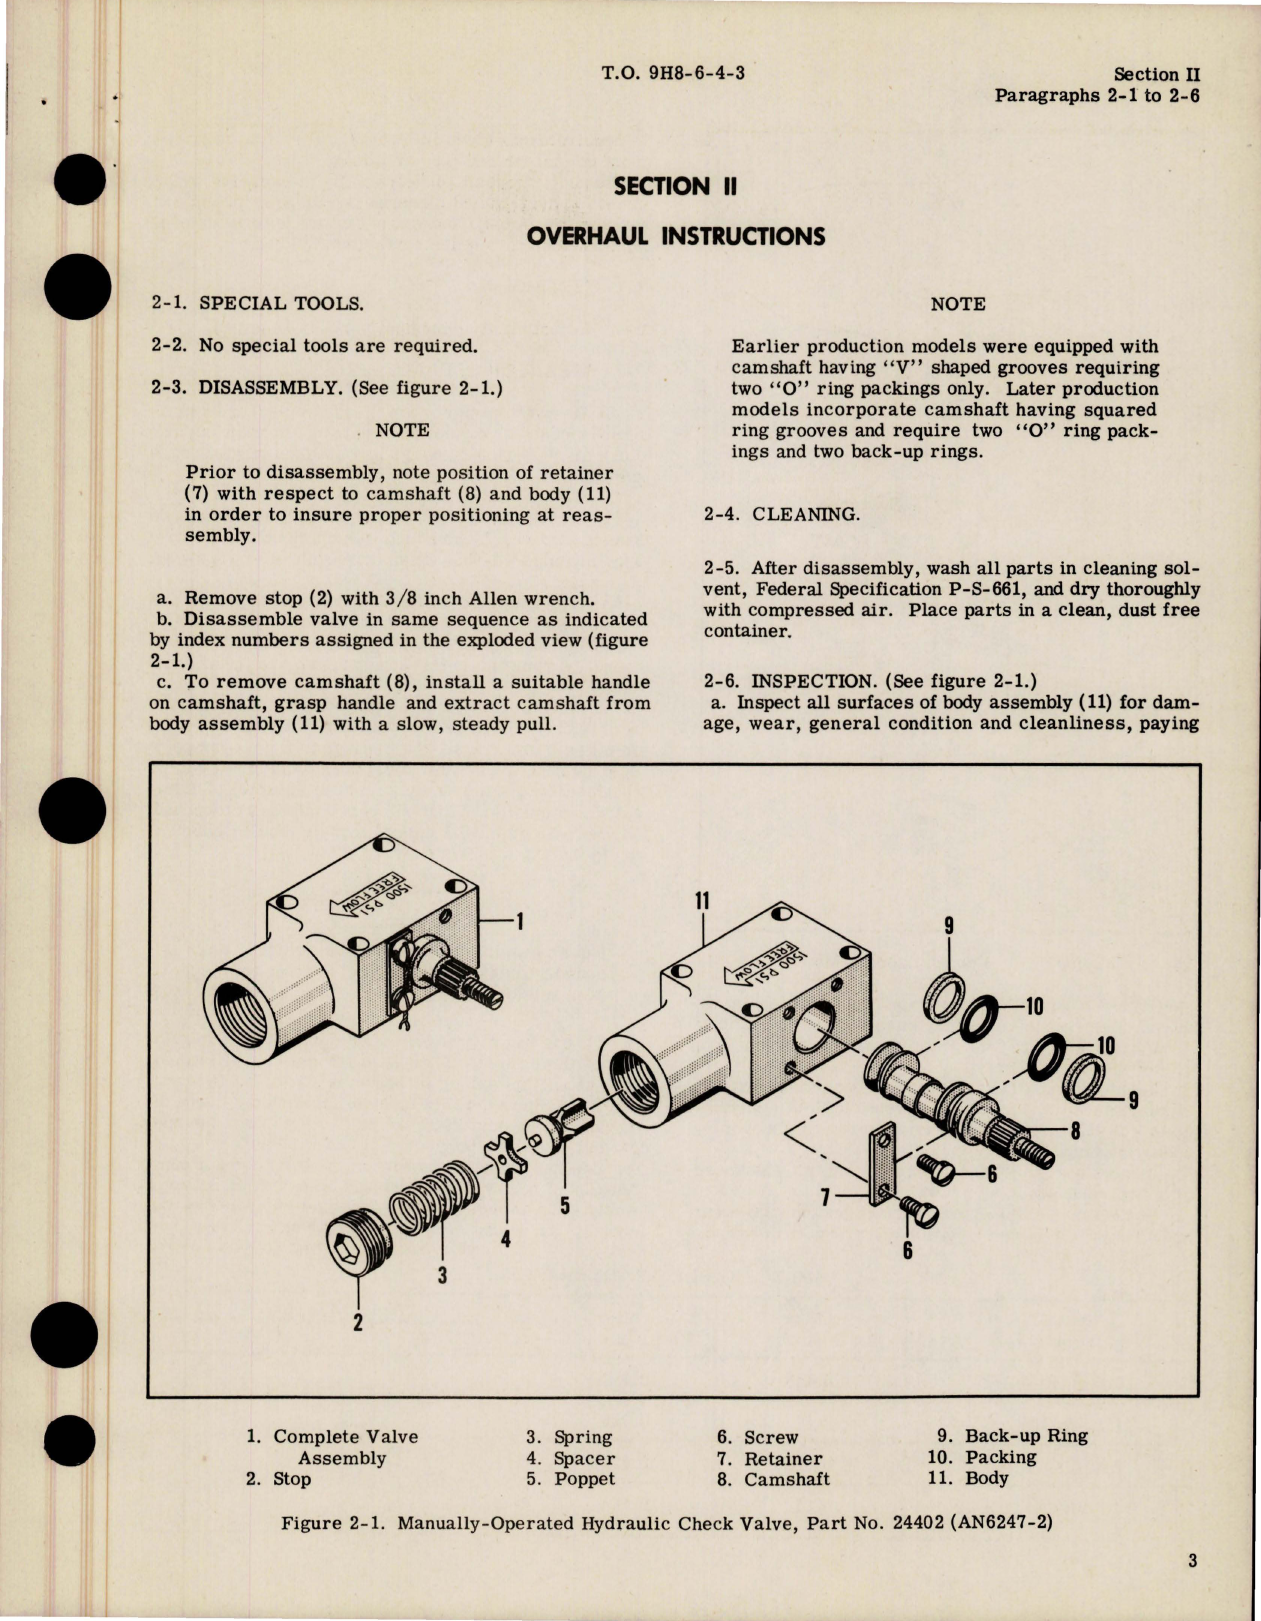 Sample page 5 from AirCorps Library document: Overhaul Instructions for Manually Operated Hydraulic Check Valves 